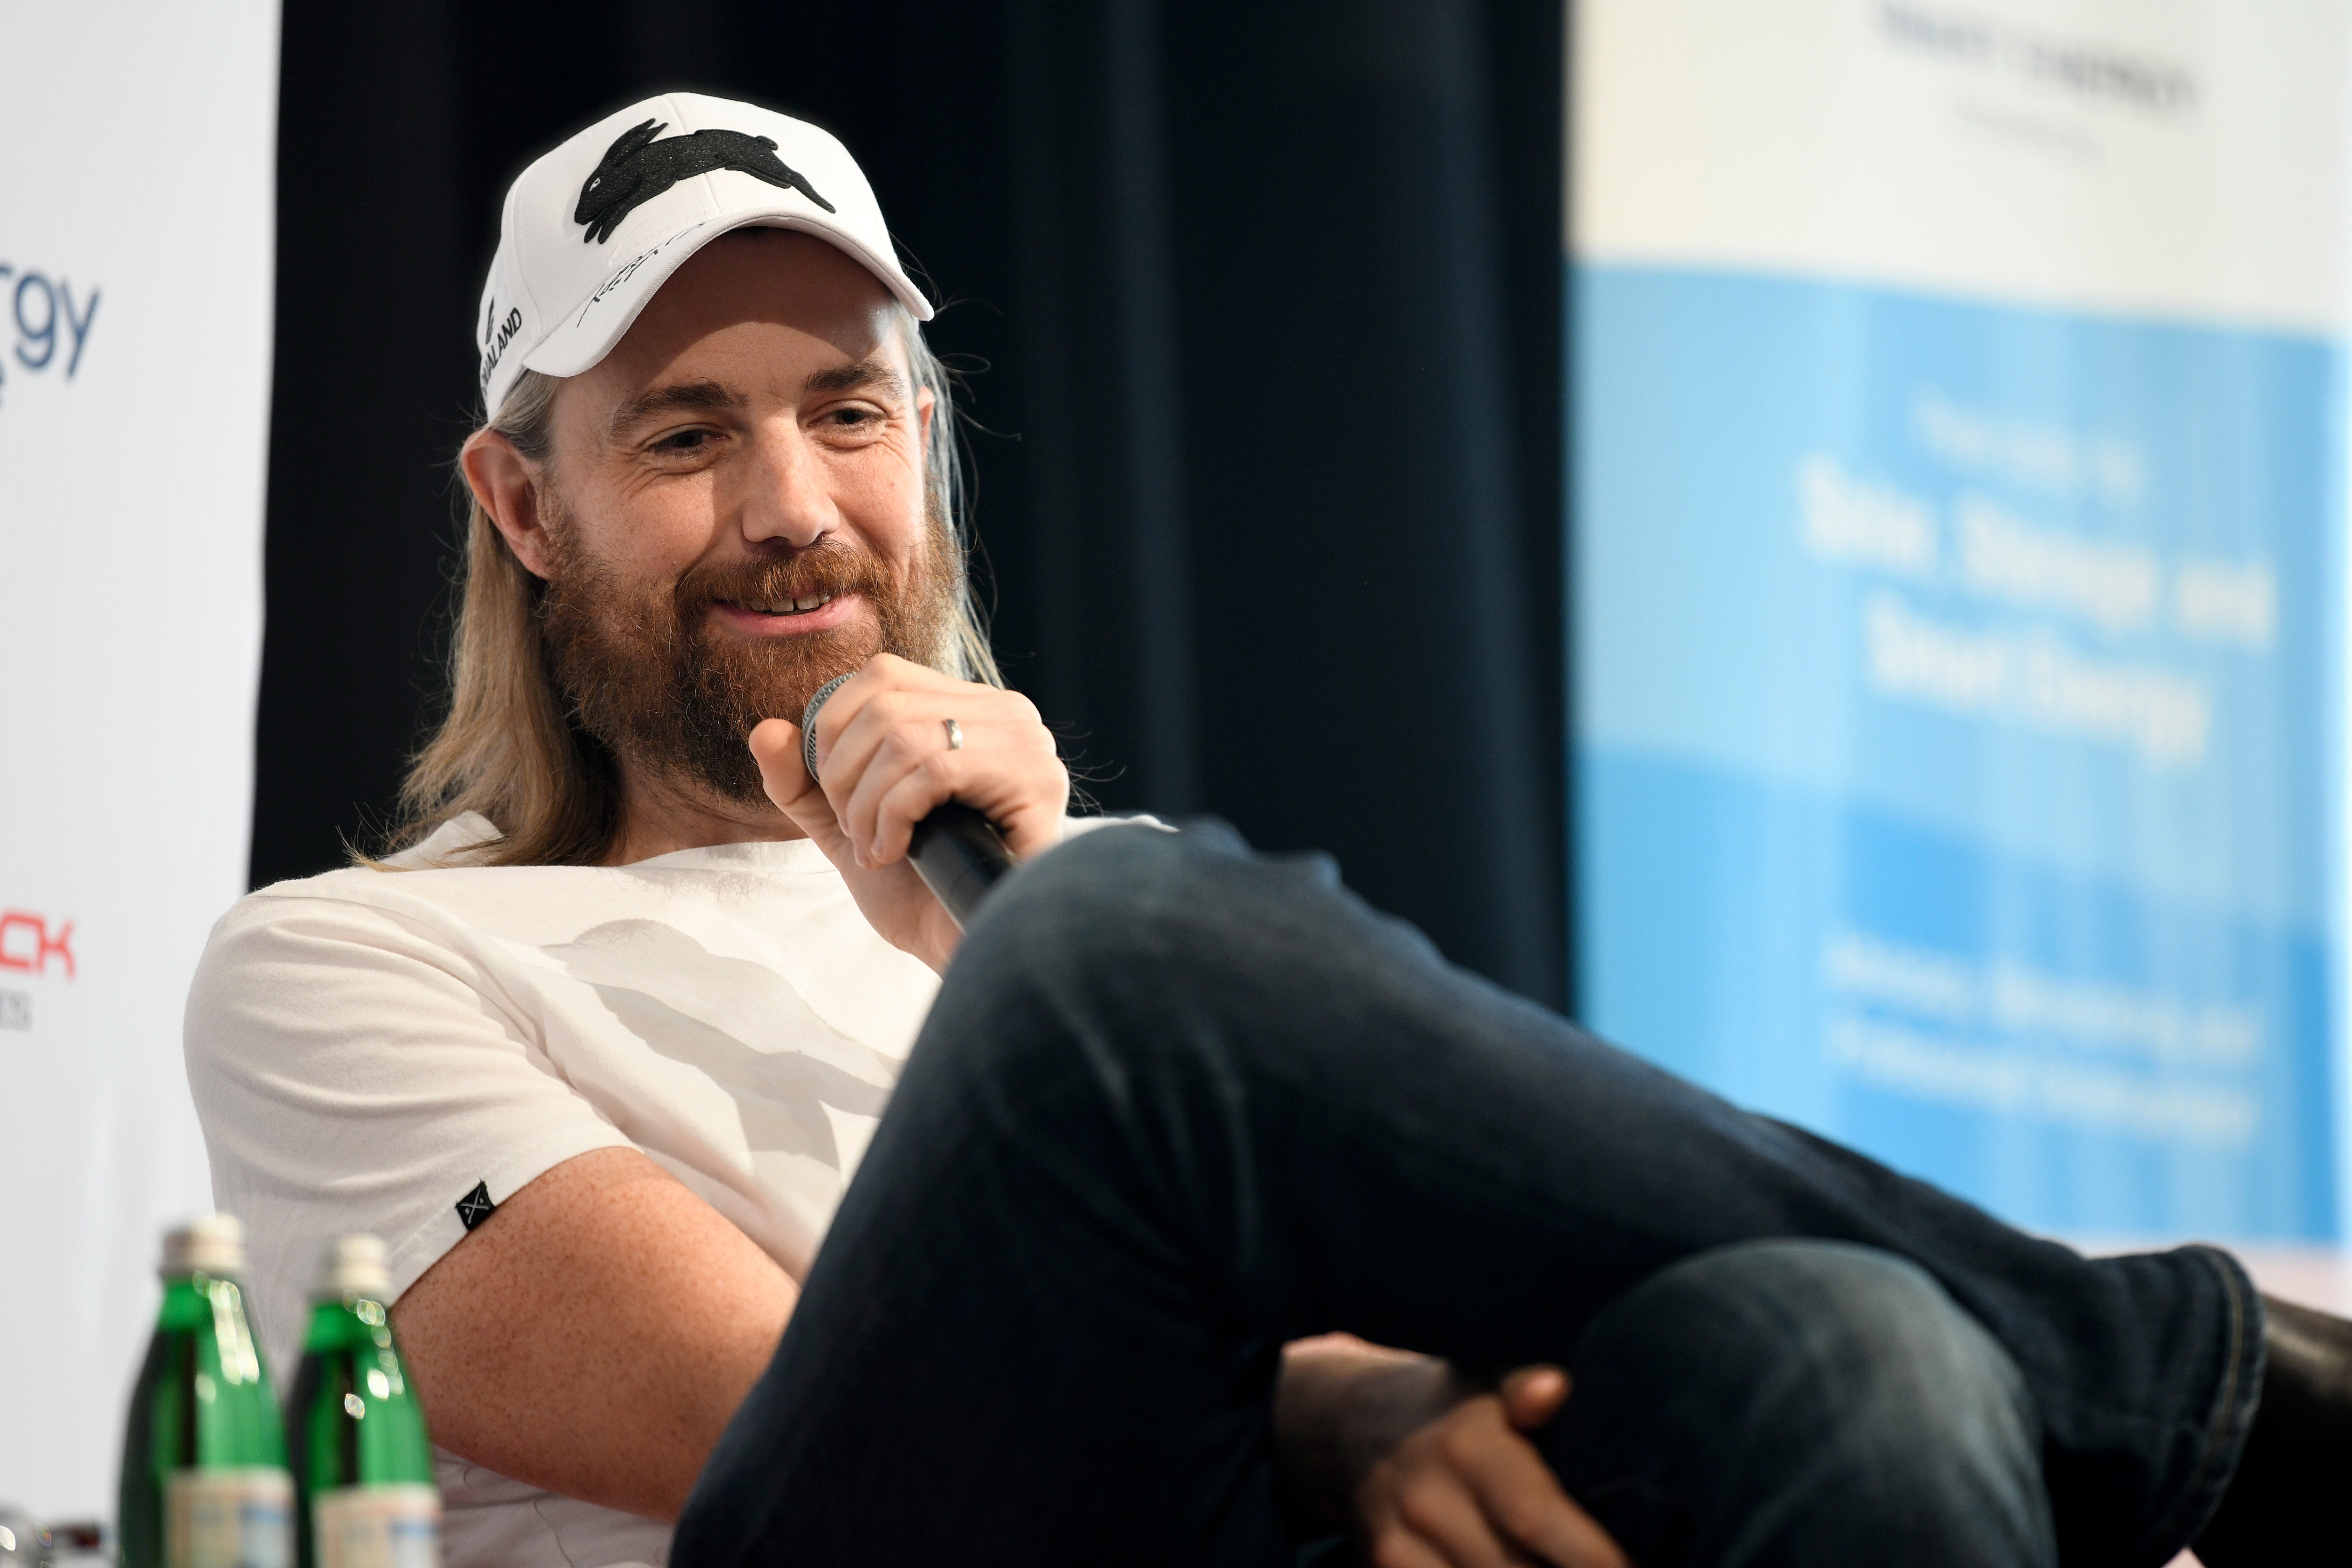 Co-Founder and CO-CEO of Atlassian, Mike Cannon-Brookes speaks during the National Smart Energy Summit at the Hilton Hotel in Sydney, Tuesday, December 10, 2019. (AAP Image/Bianca De Marchi) NO ARCHIVING